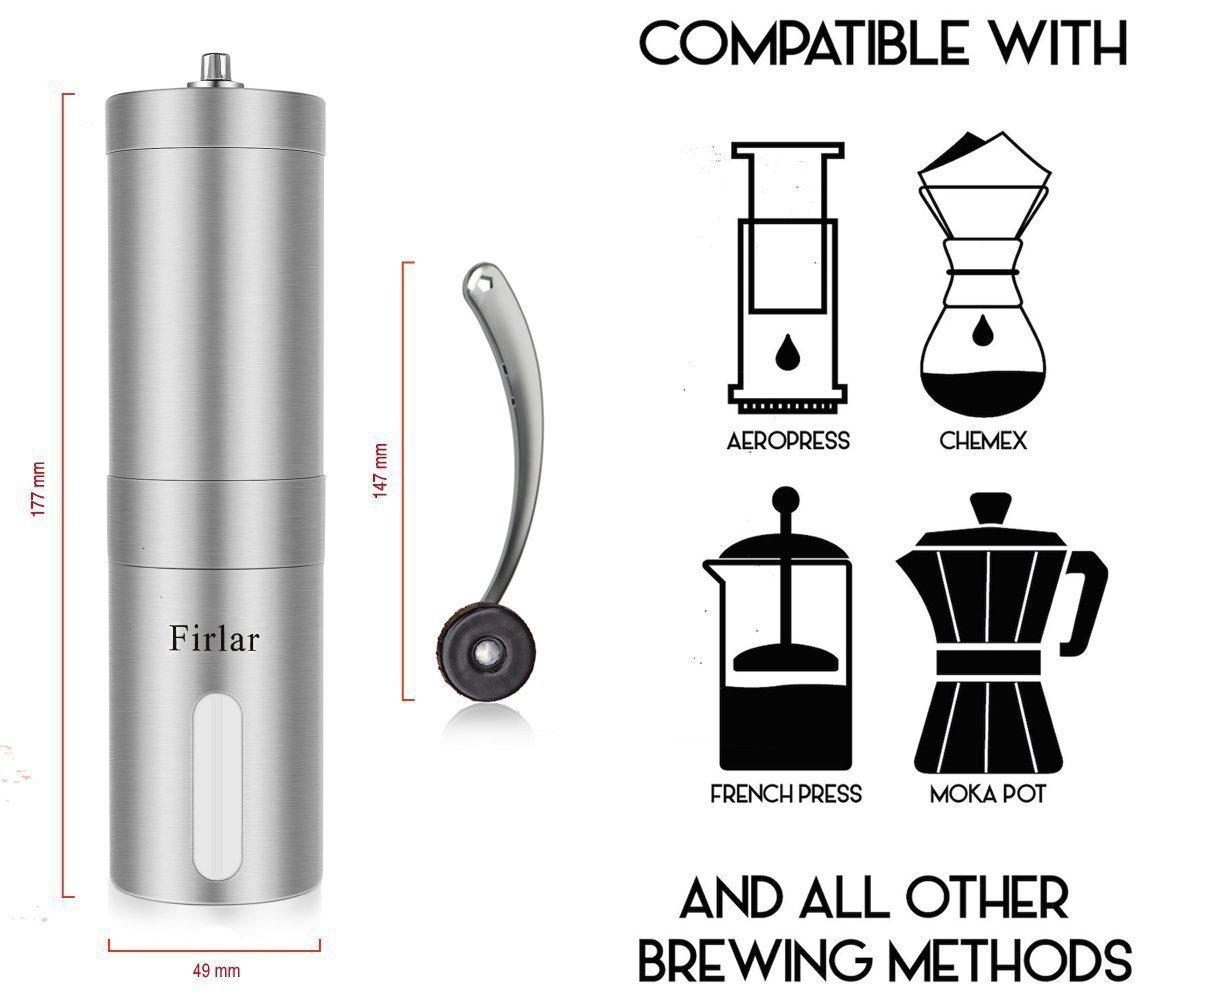 uses for the finlar manual grinder